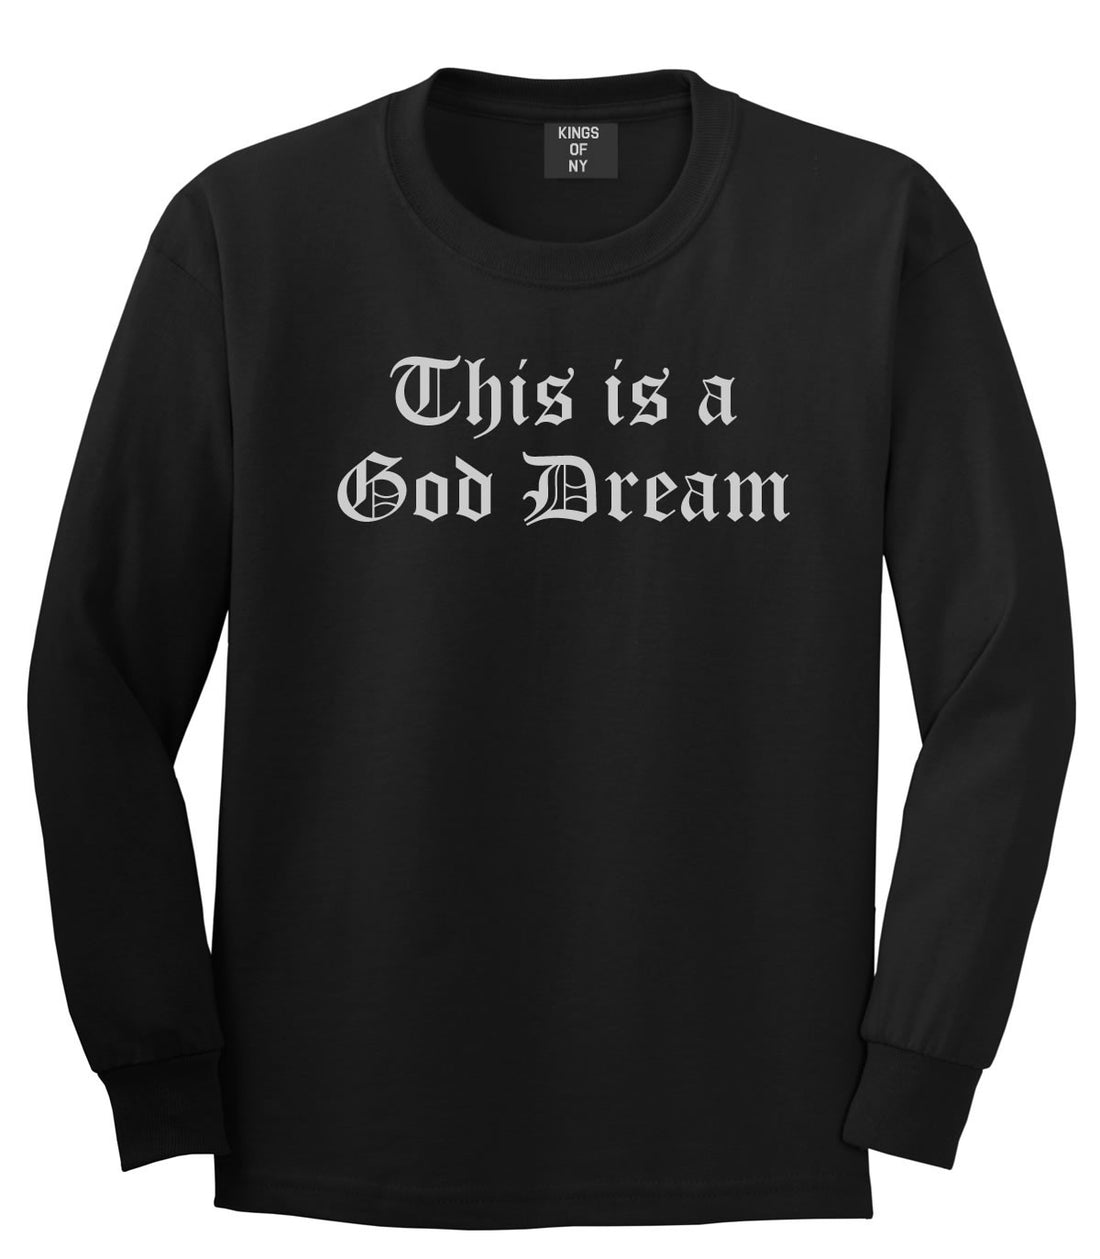 This Is A God Dream Gothic Old English Long Sleeve T-Shirt in Black By Kings Of NY